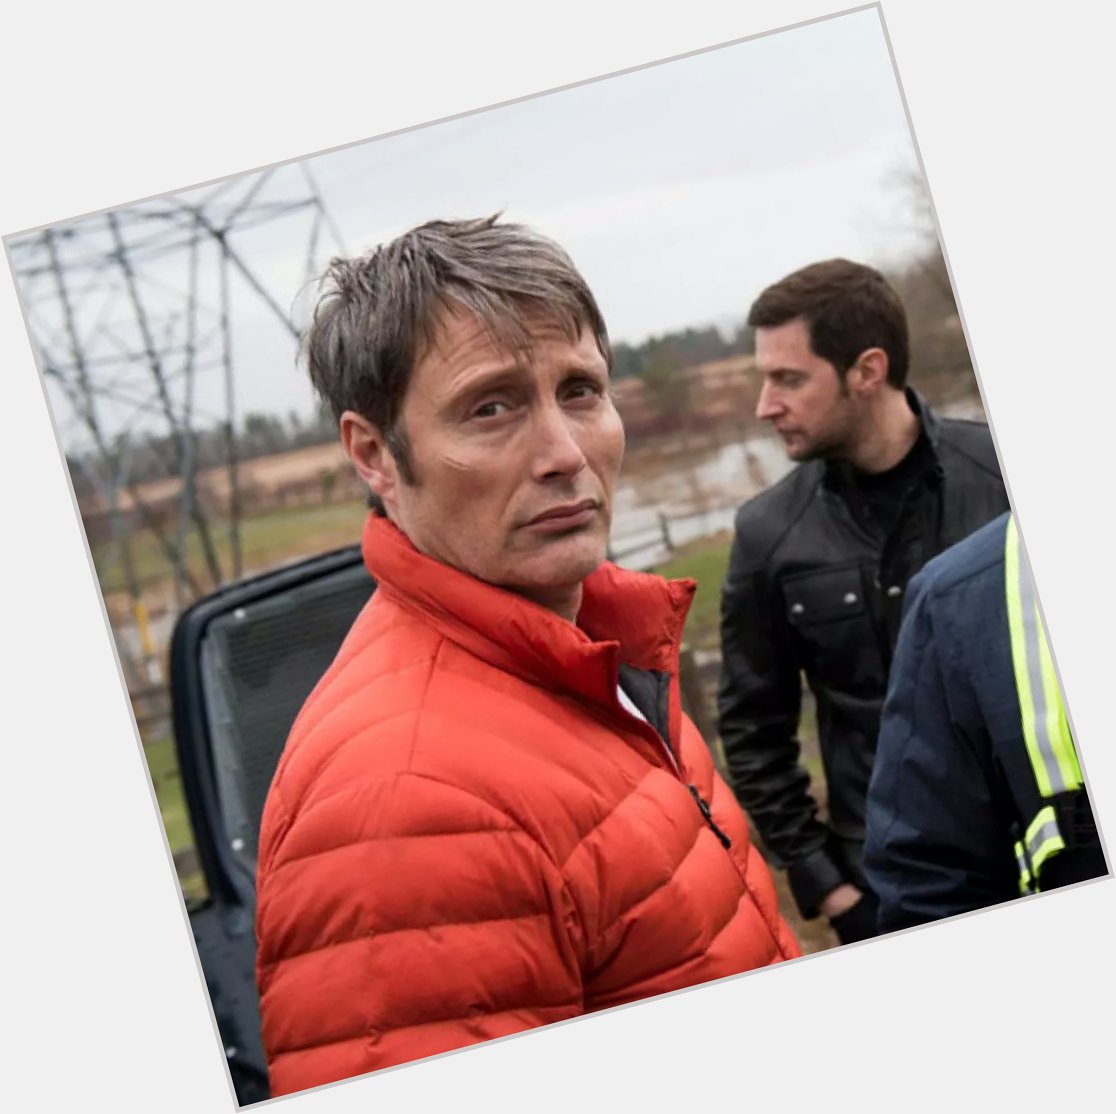  A very happy Birthday to Mads Mikkelsen 